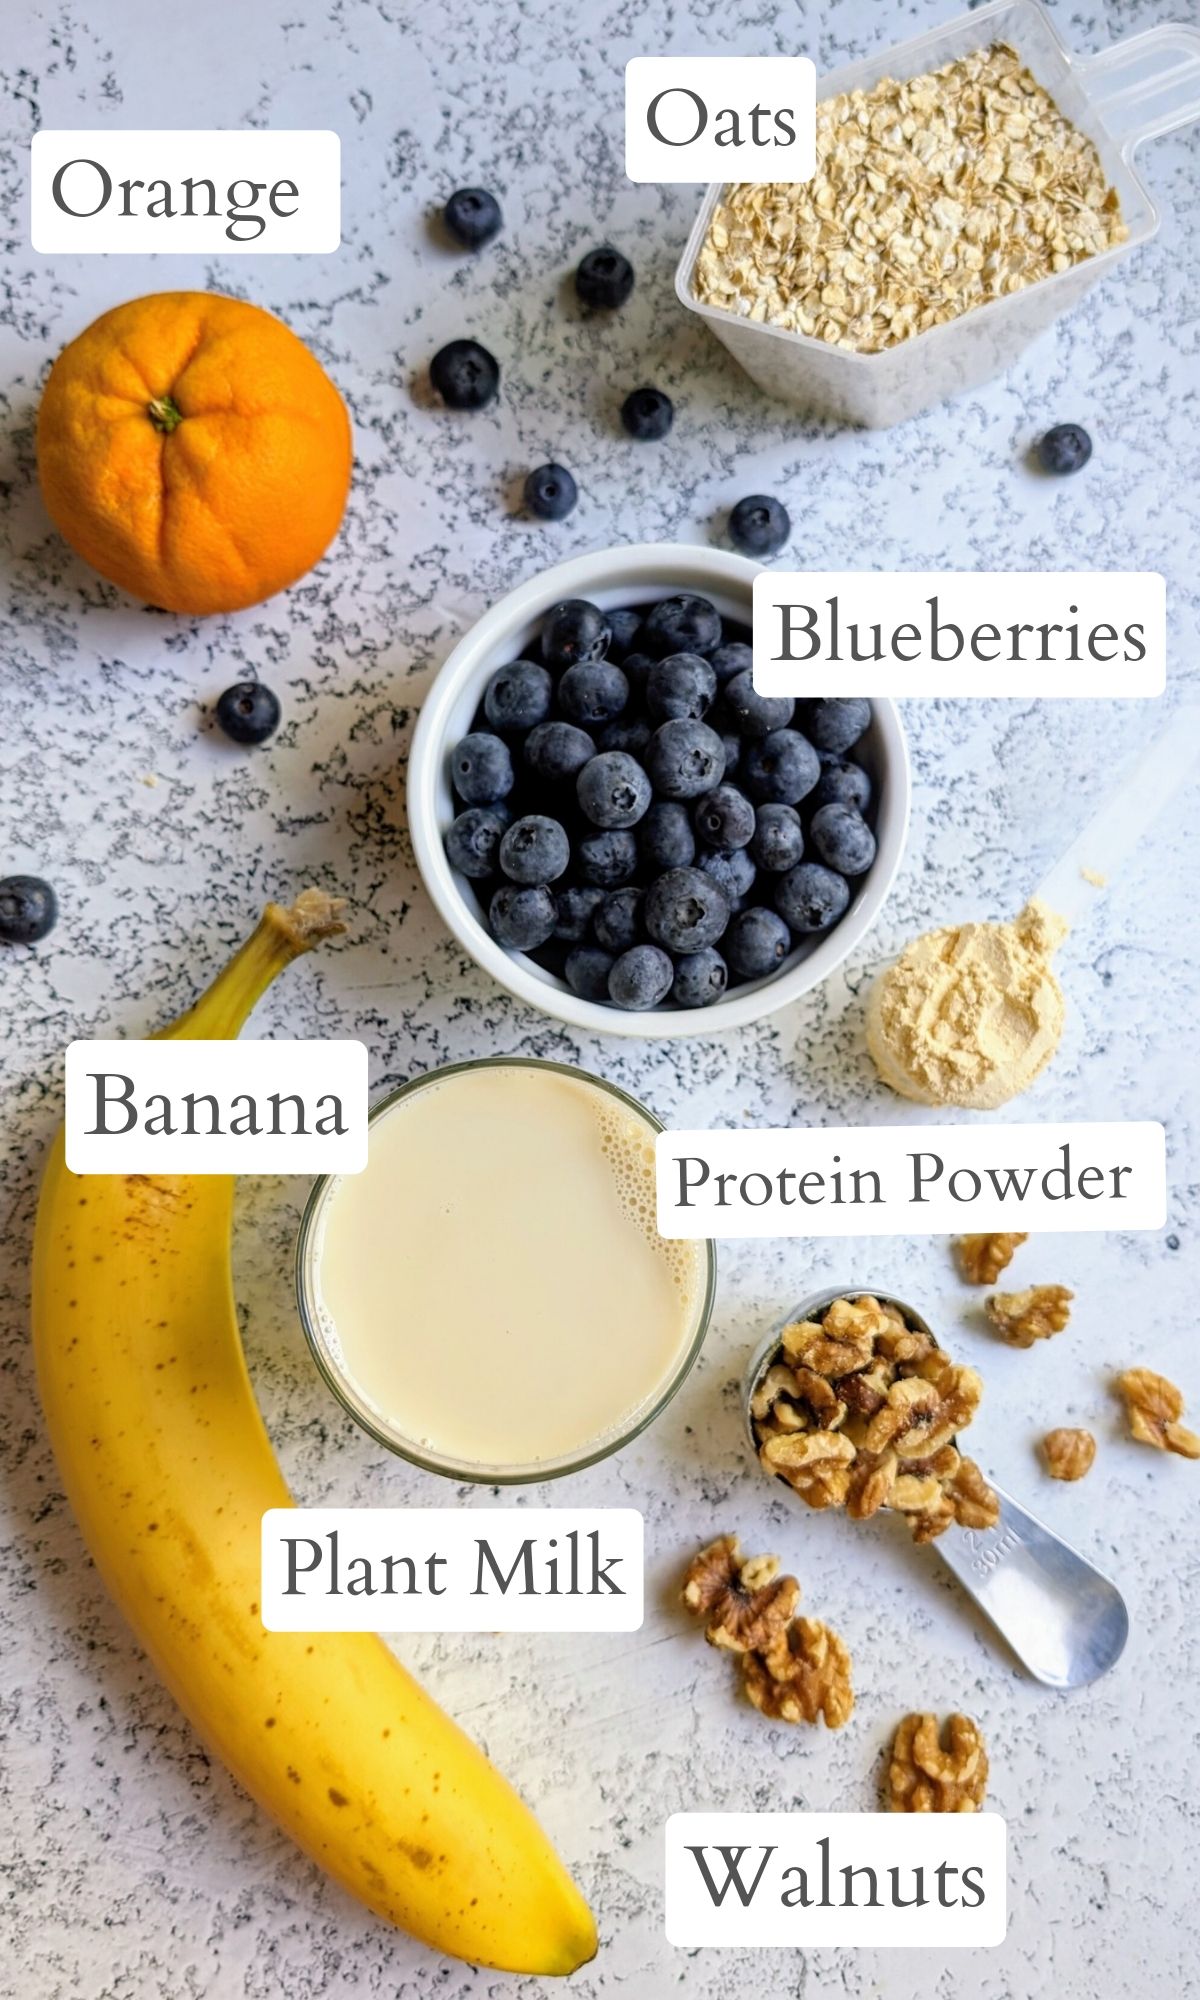 ingredients for a oatmeal blueberry smoothie laid out on a countertop: oats, an orange, vanilla protein powder, banana, plant based milk, walnuts, and fresh blueberries.